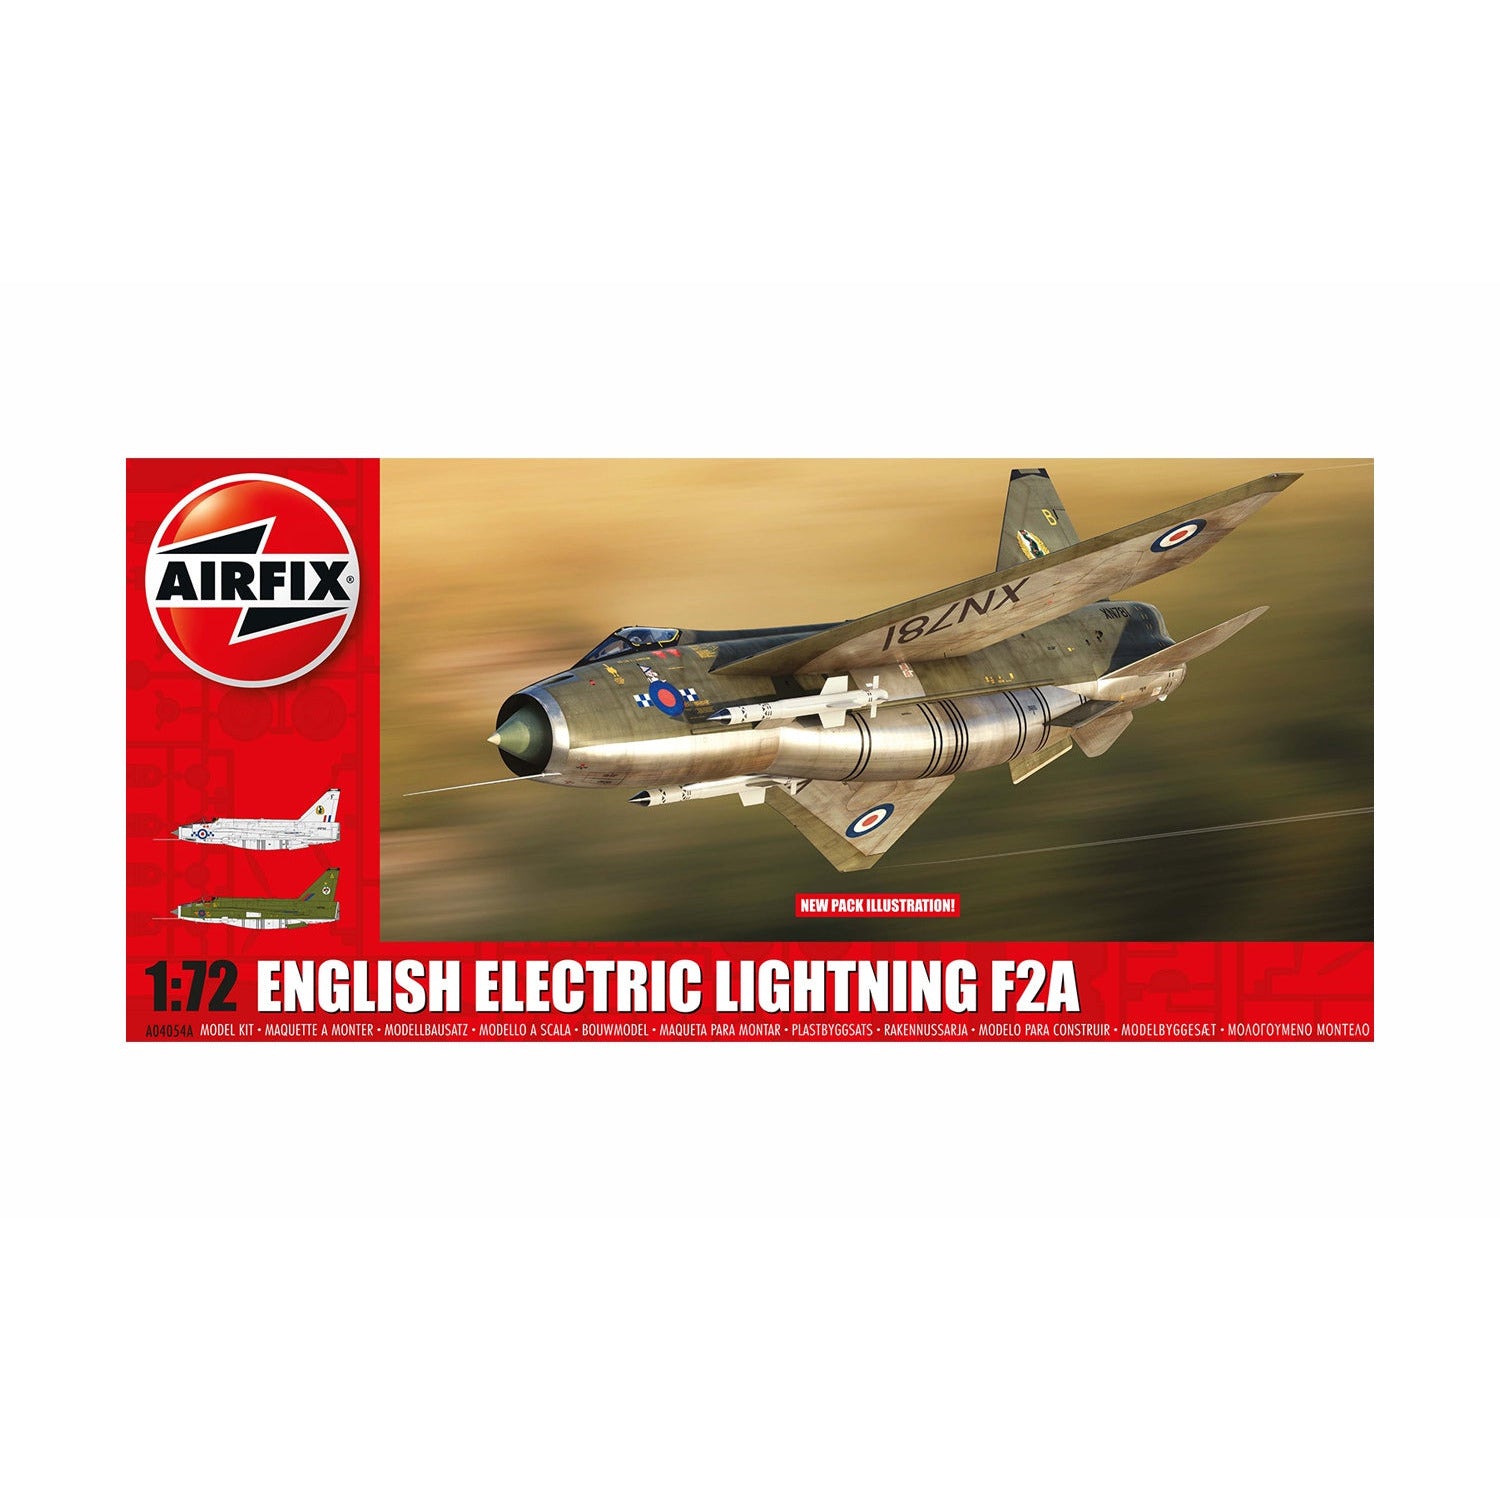 English Electric Lightning 1/72 #04054A by Airfix